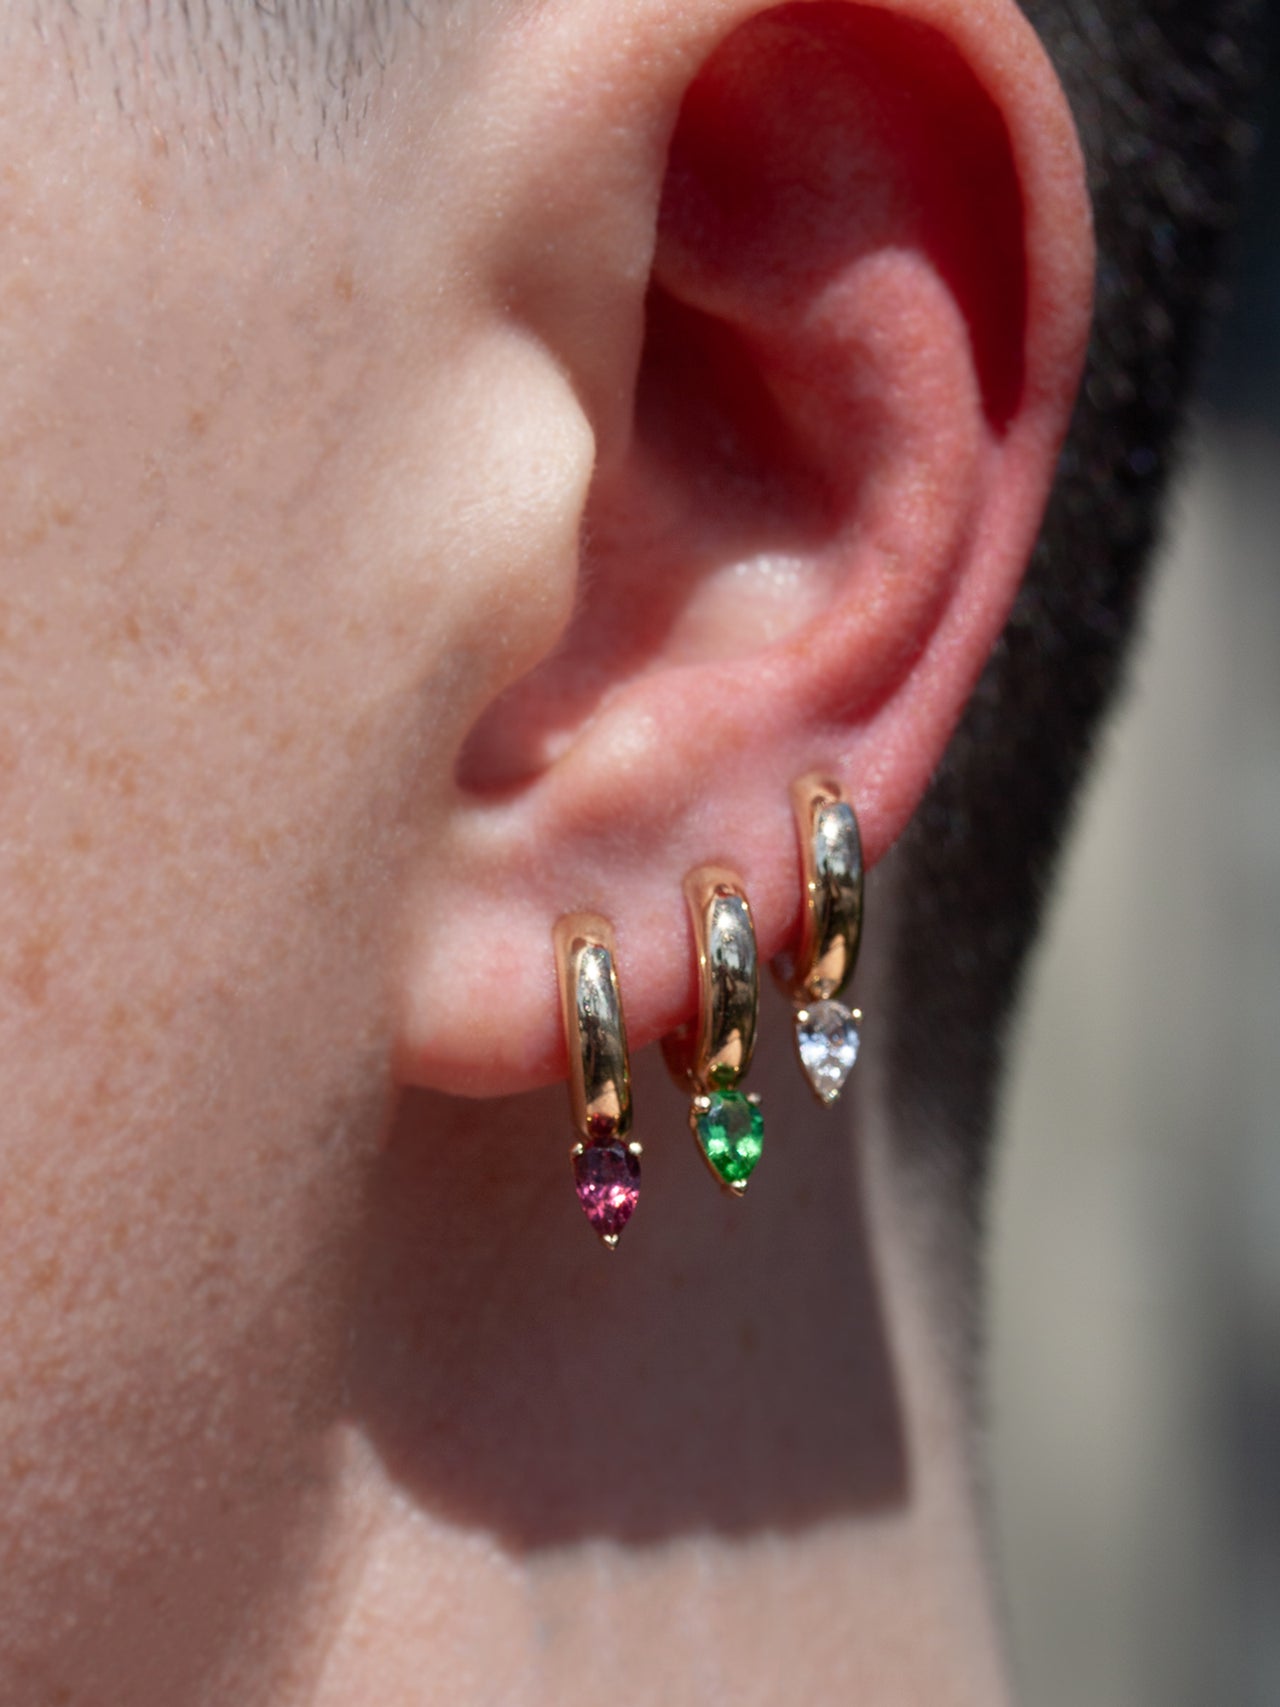 14kt Gold Tsavorite Huggies pictured in second piercing along with White Sapphire and Rhodolite.